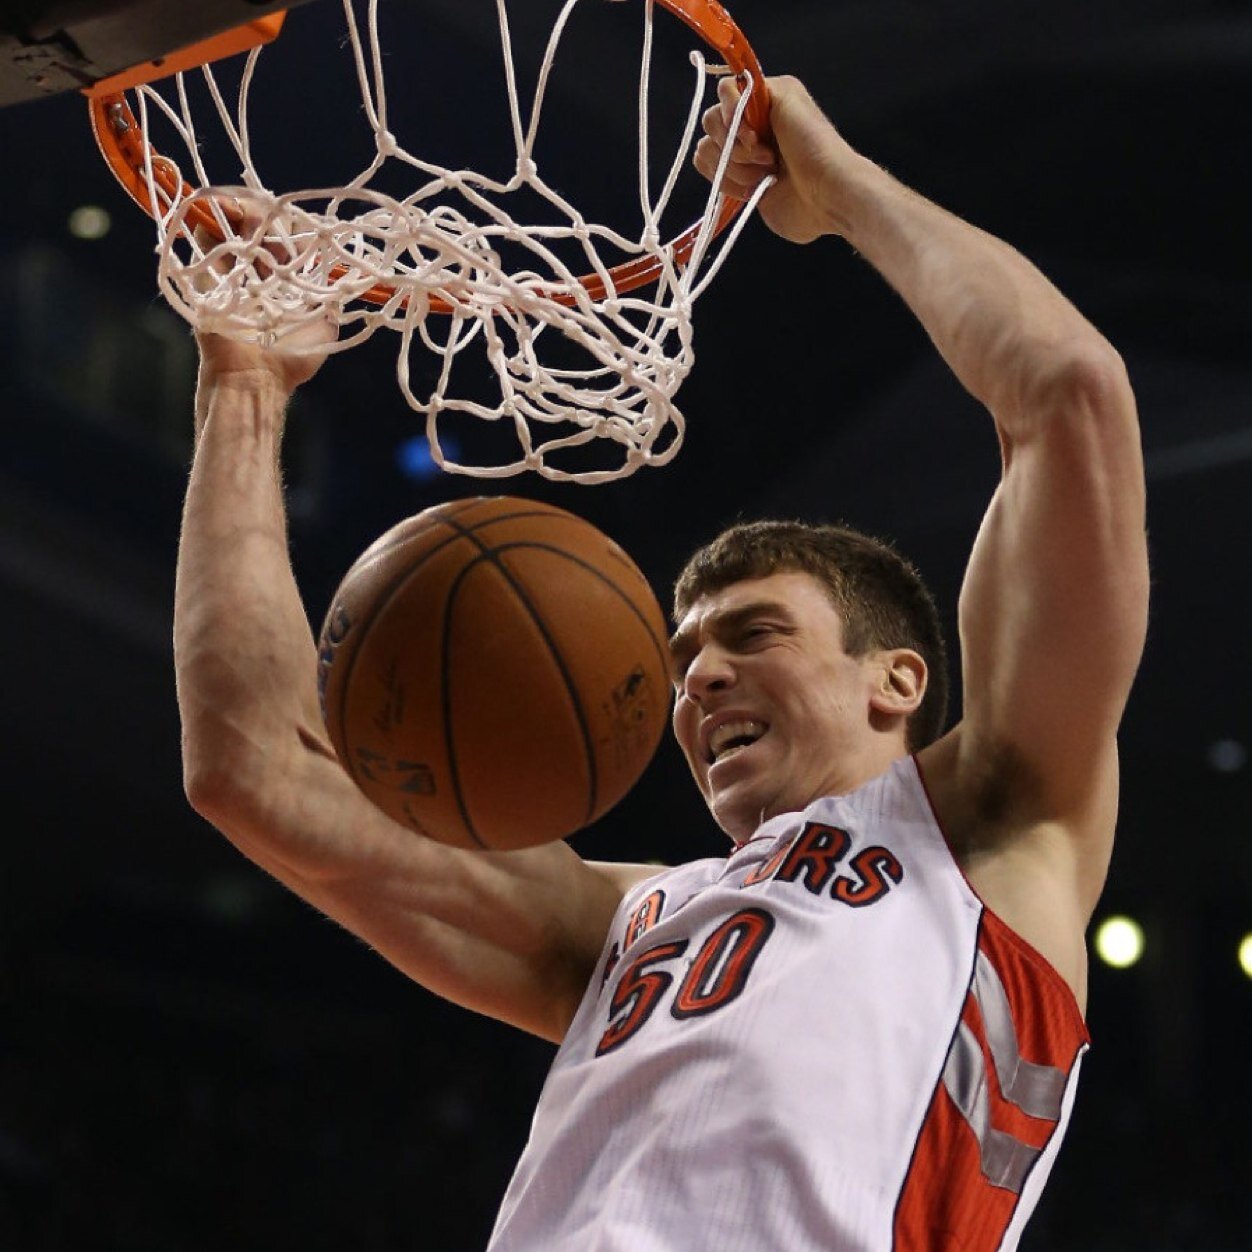 Official fan page for #50 Tyler Hansbrough! Instagram @welovepsychot! @Thans50